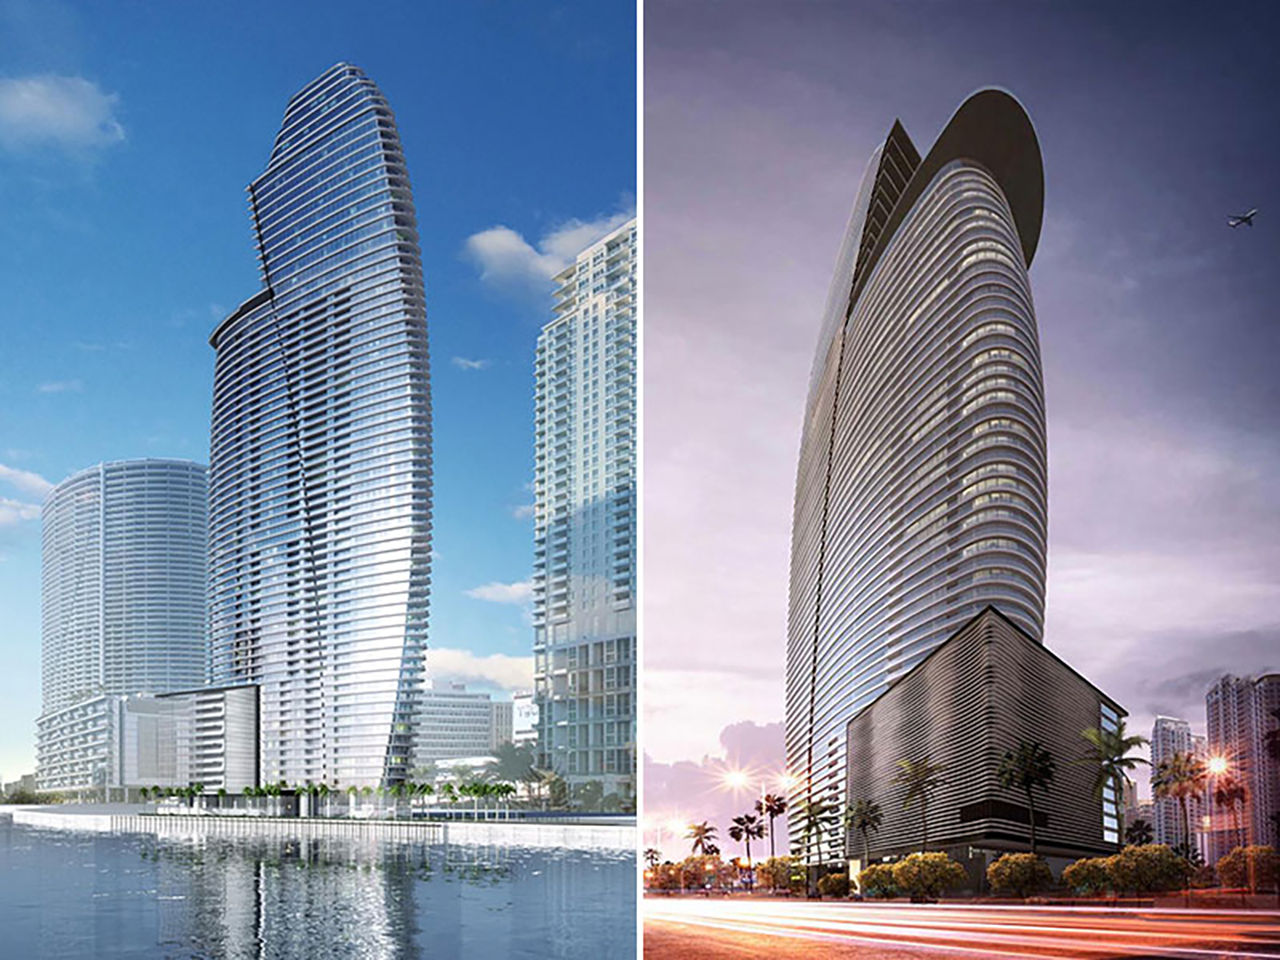 Coming soon: Aston Martin’s first real estate project in Miami